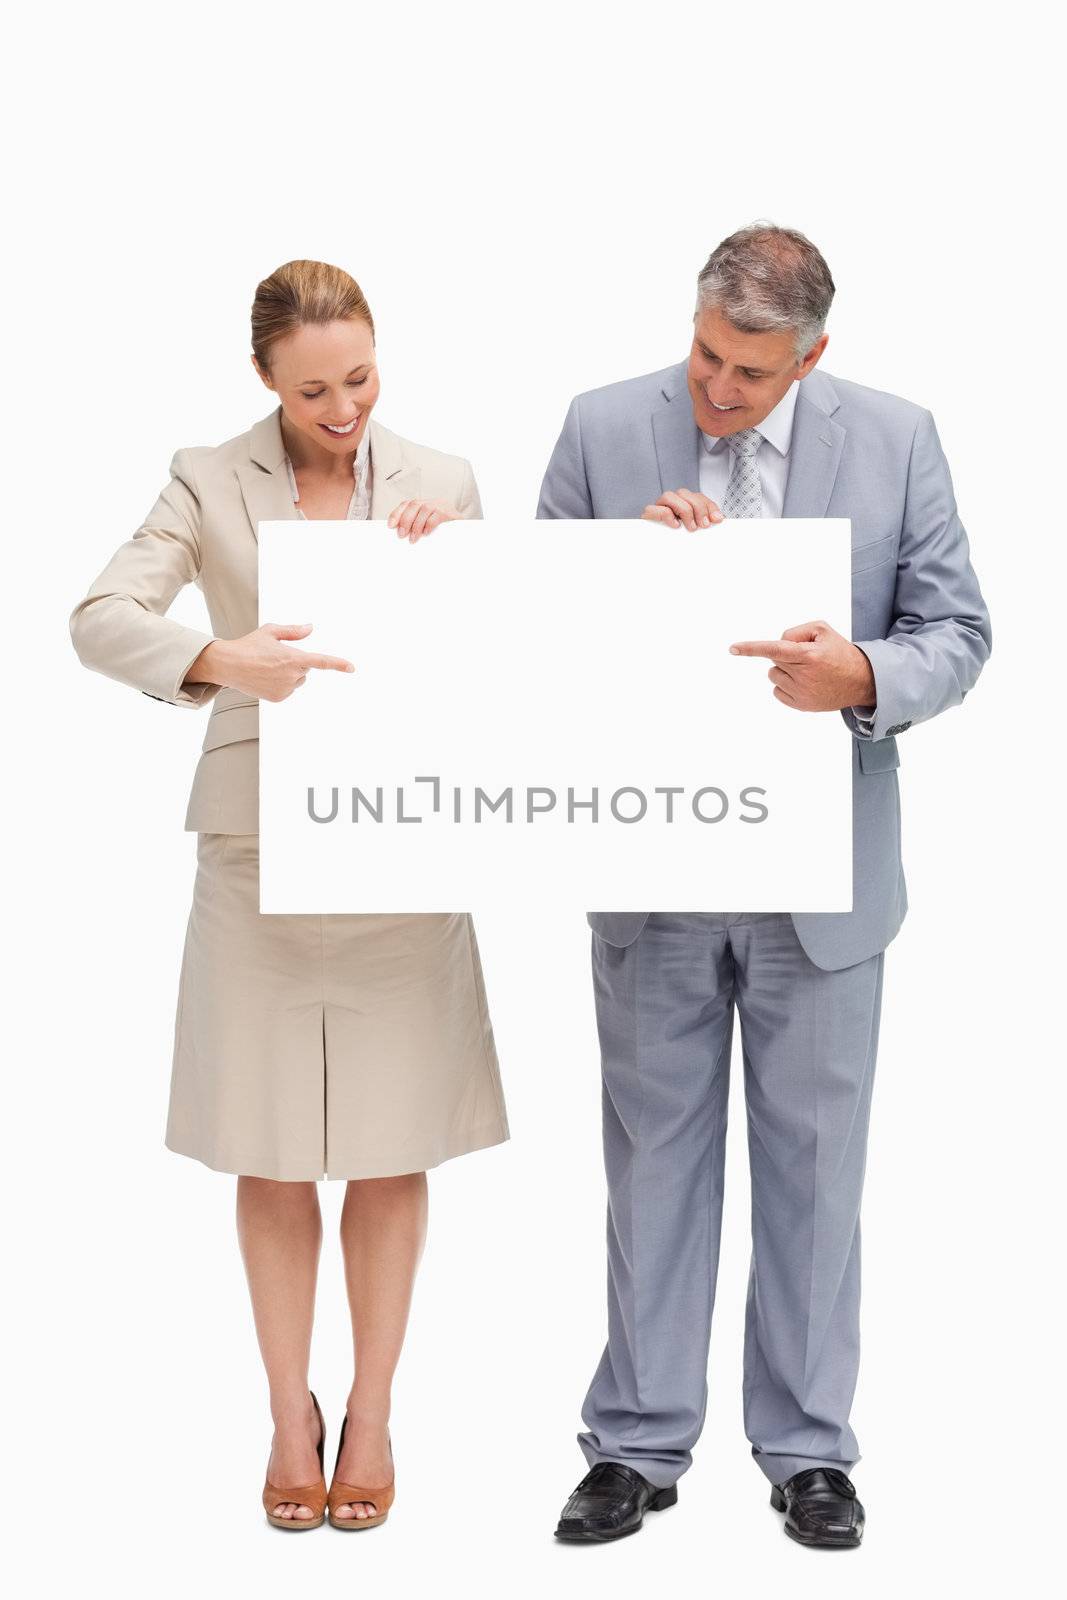 Smiling business people holding a poster against white background